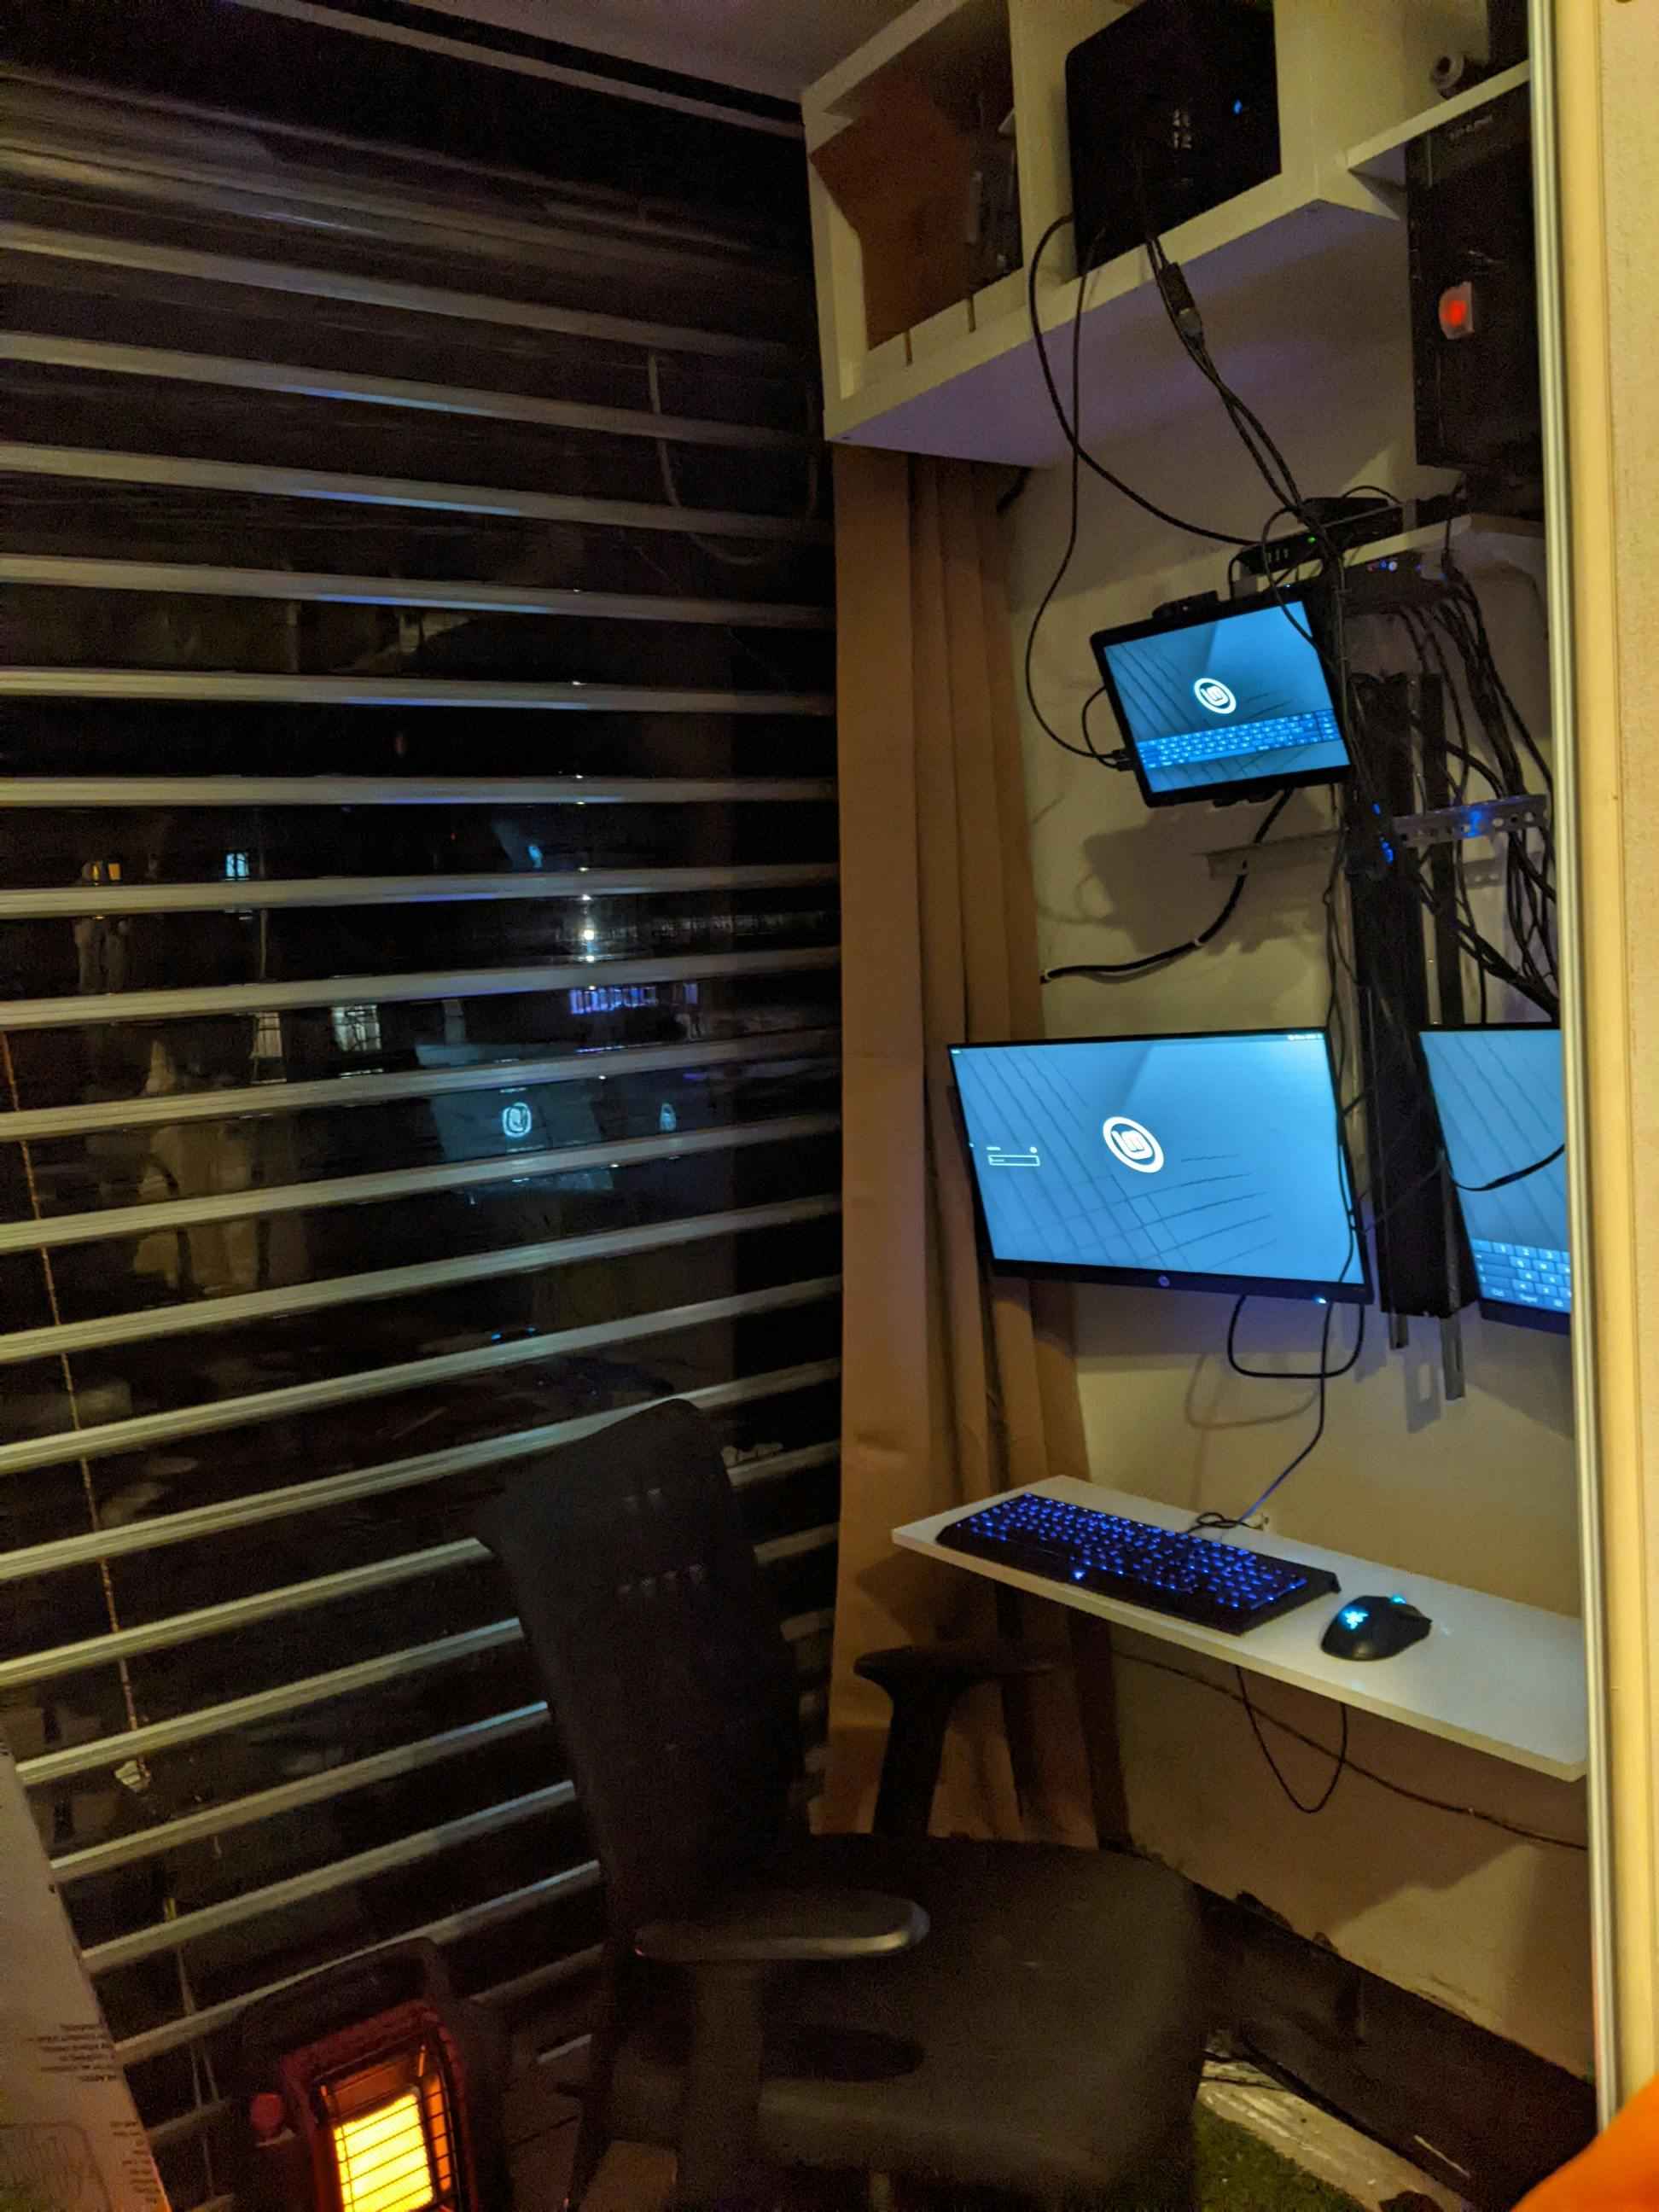 My computer setup inside the tiny home behind the roller door, with my computers, network rack, and tablet